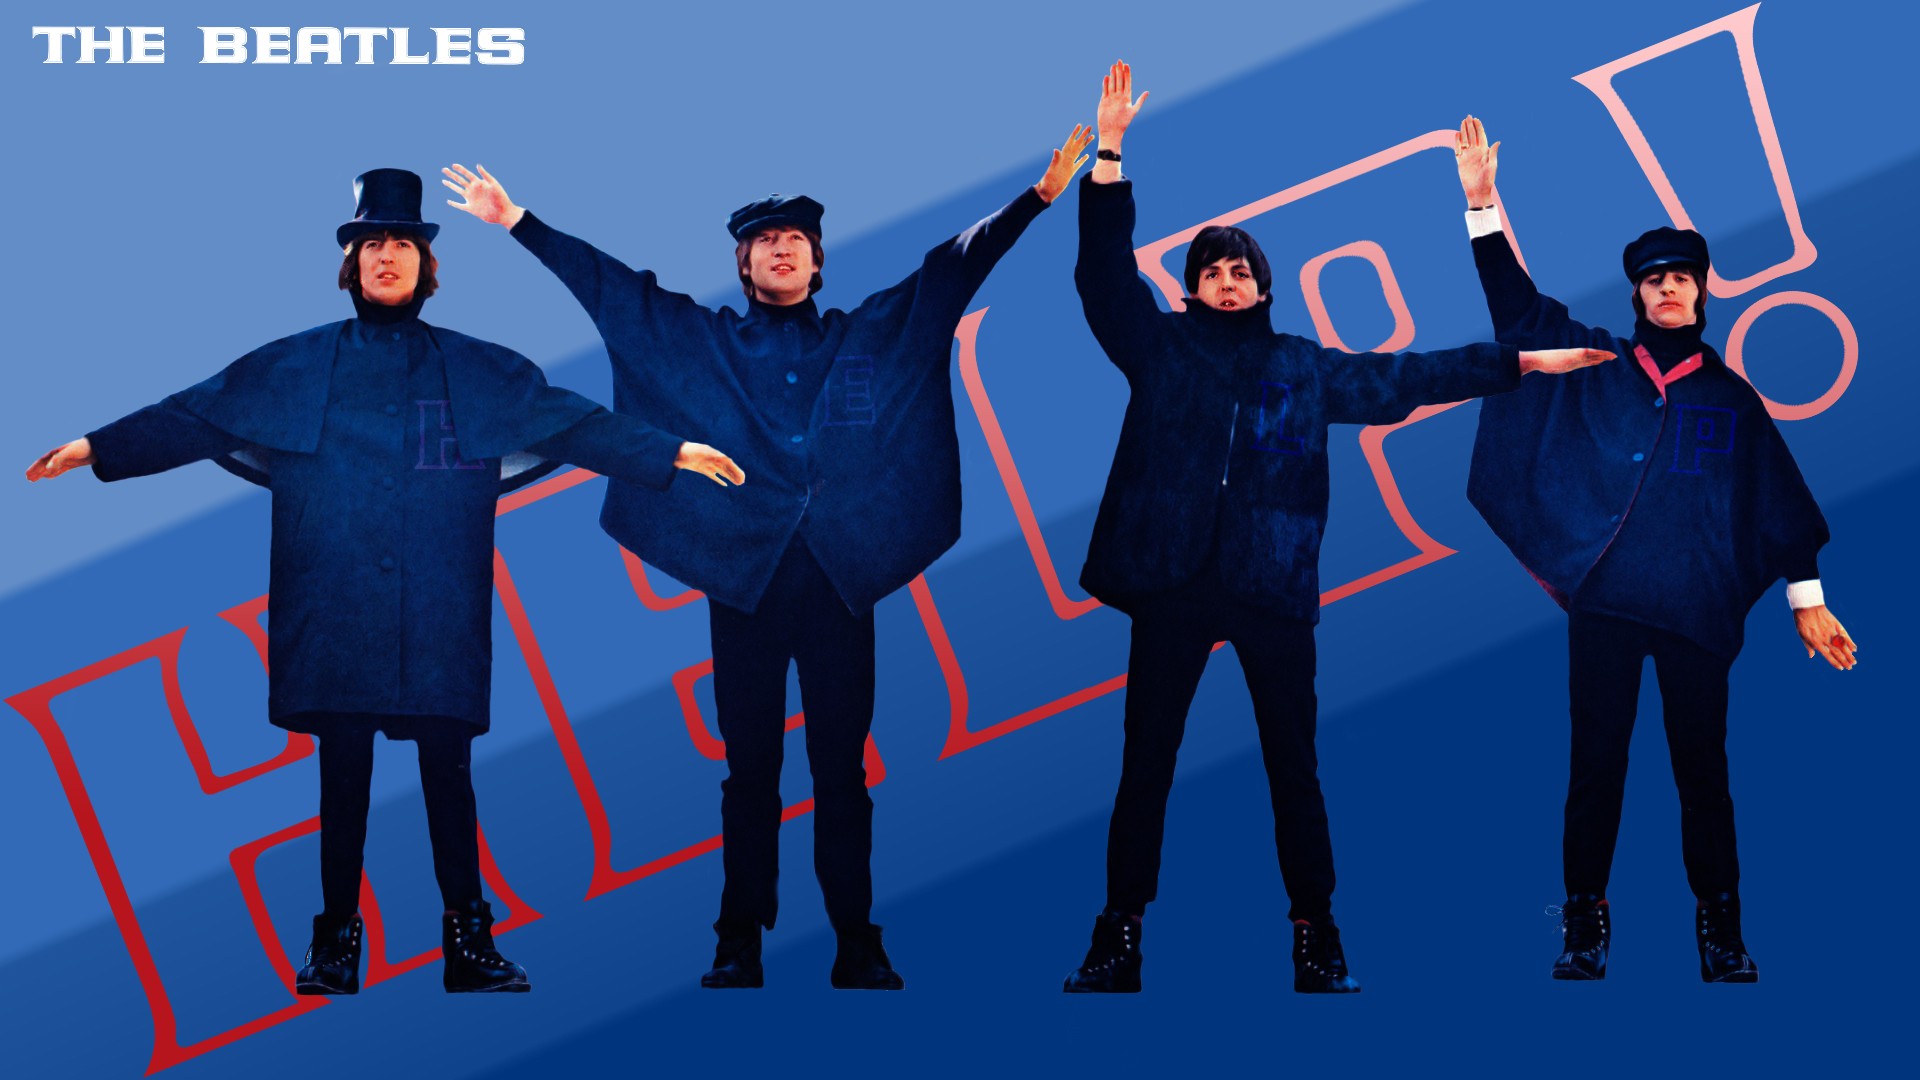 The Beatles For The Movie Help Hd Oboi Fon 19x1080